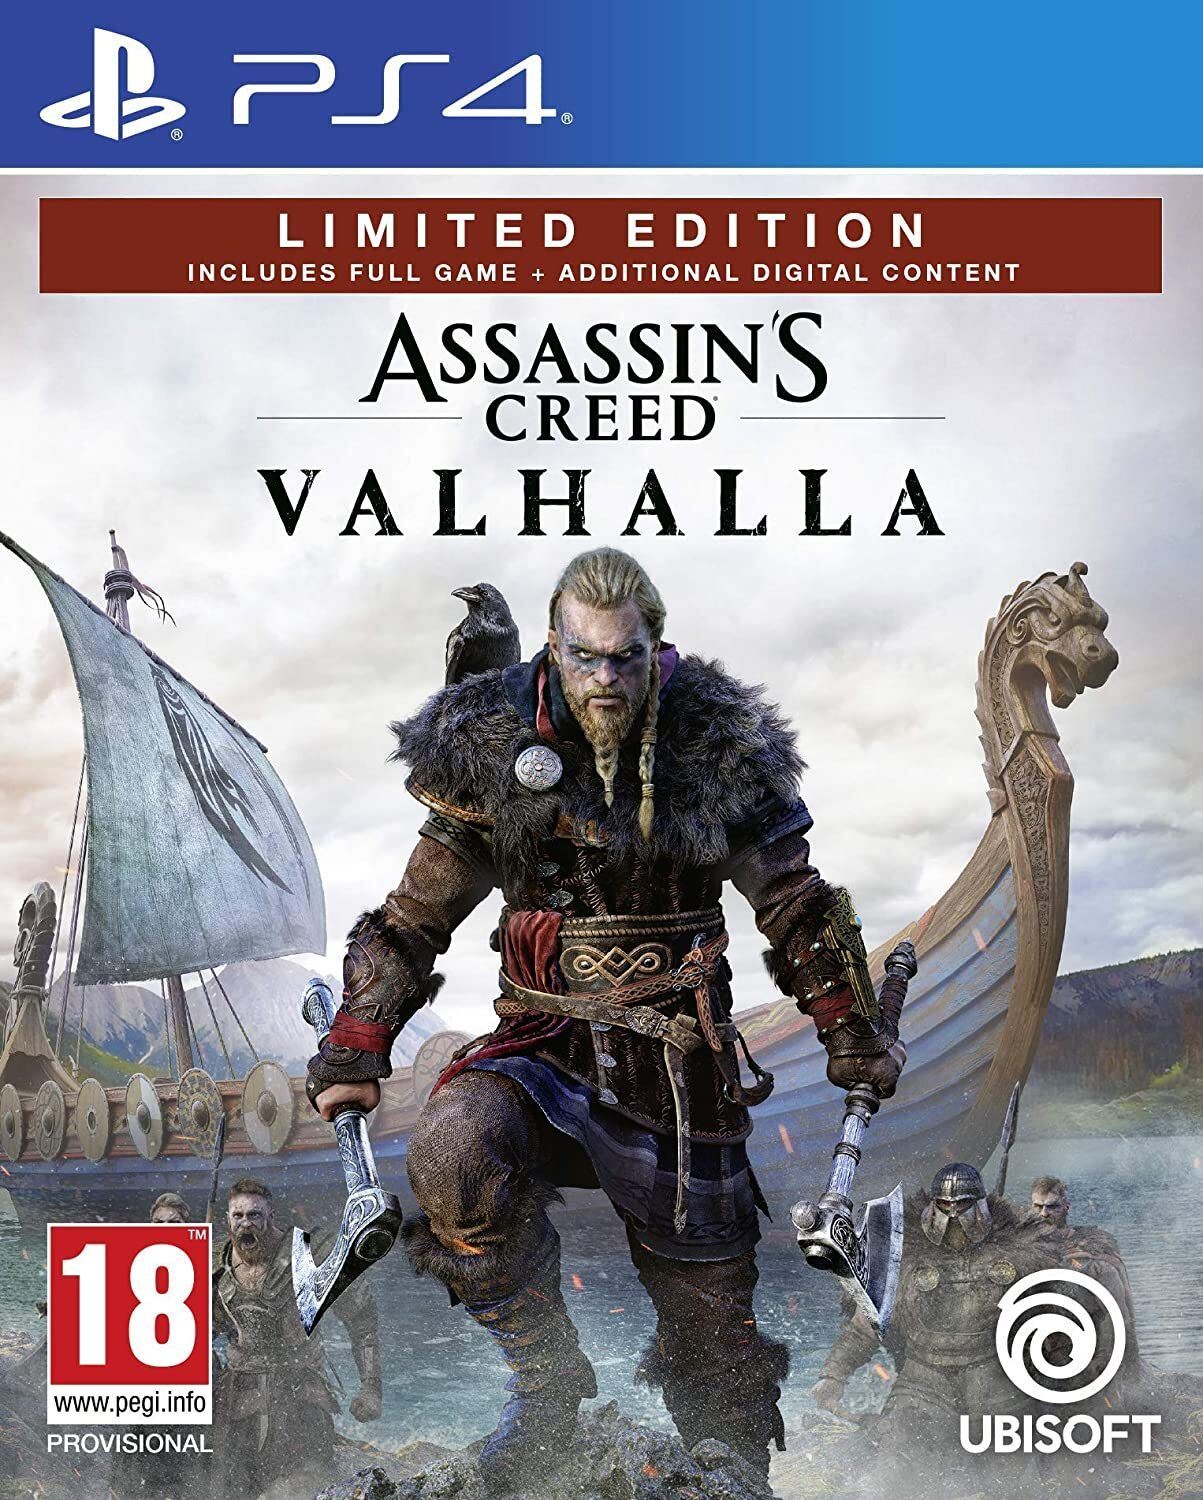 Assassin's Creed Valhalla - Videojuego (PS4, Xbox Series X/S, PC, Xbox One  y PS5) - Vandal